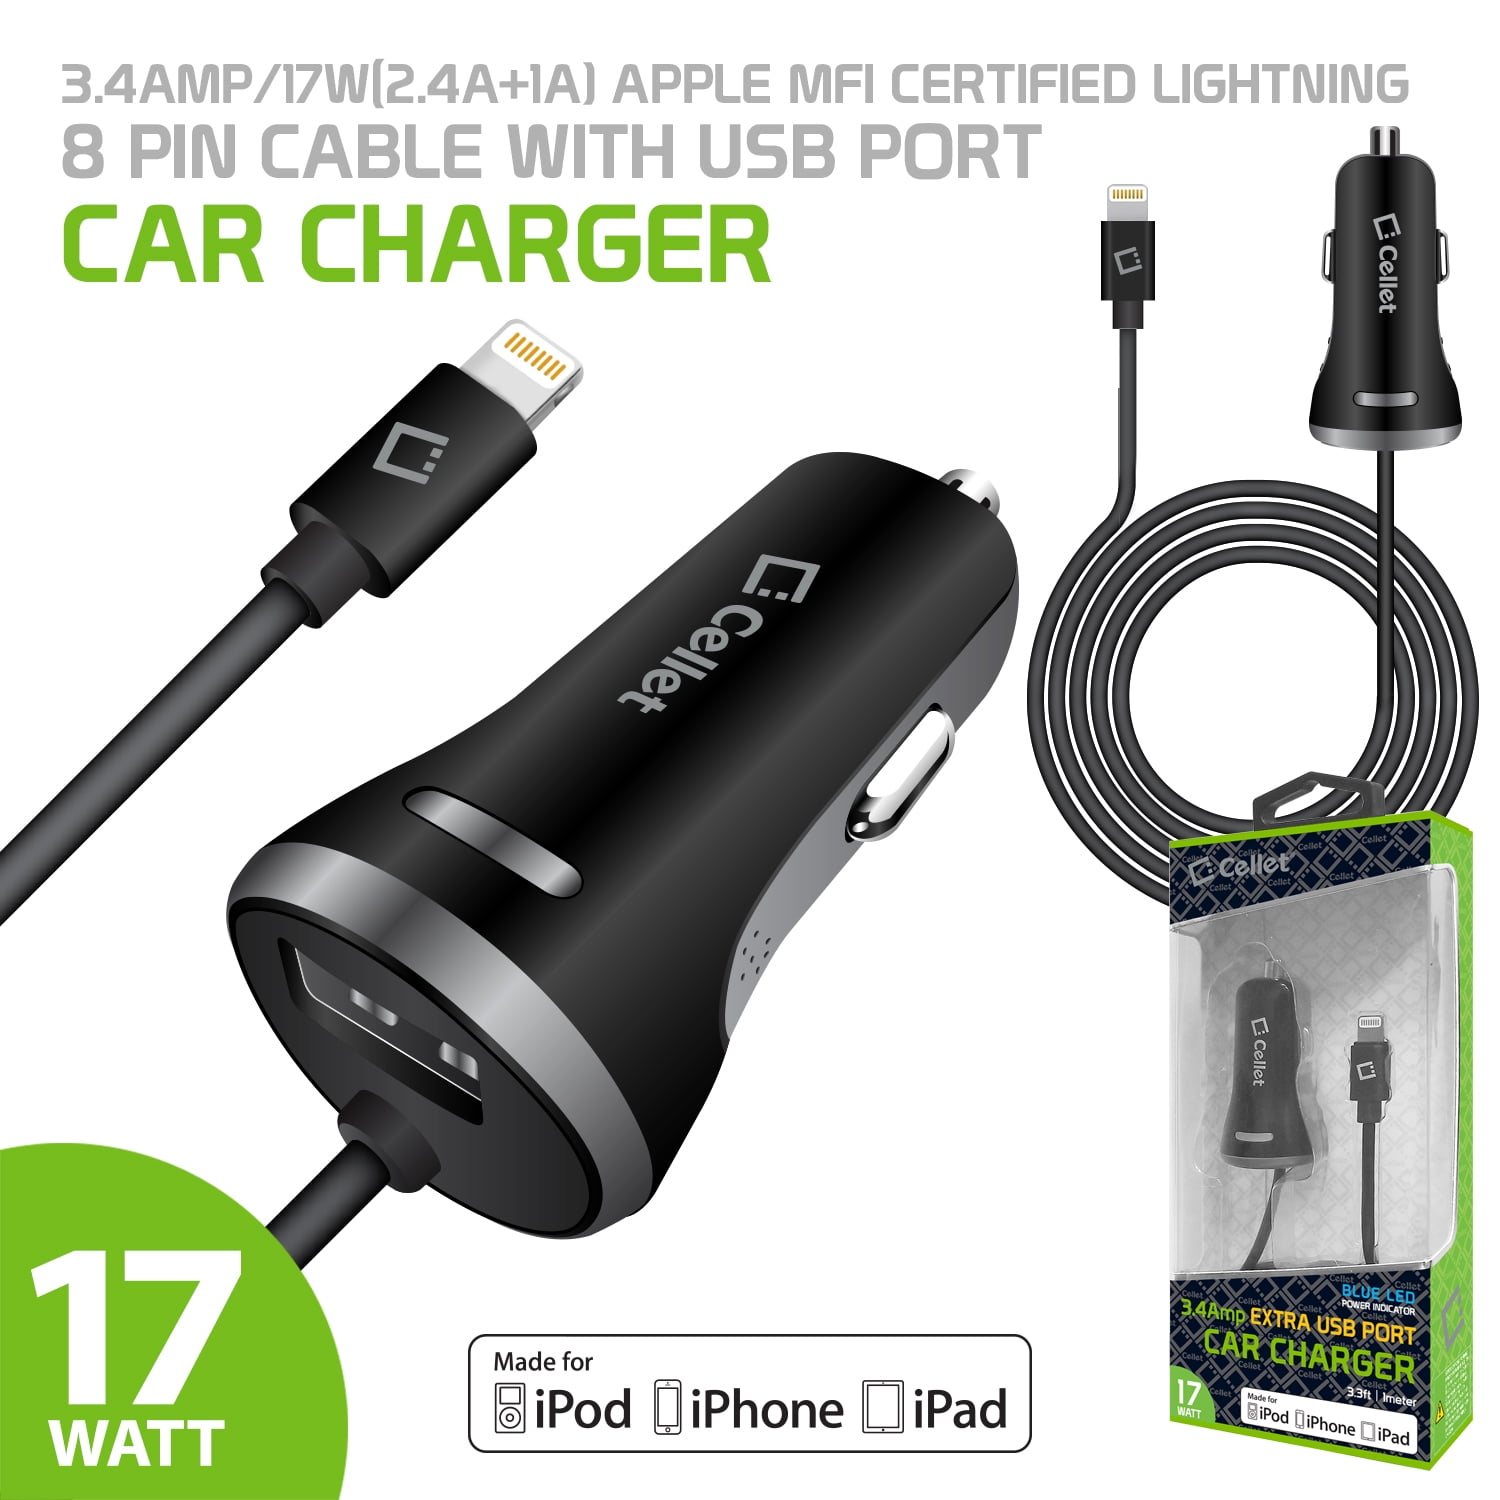 Touch LED MicroUSB Light Car Charger Works for Nokia 3.4 with Quick 2.1A and Extra USB Port! 